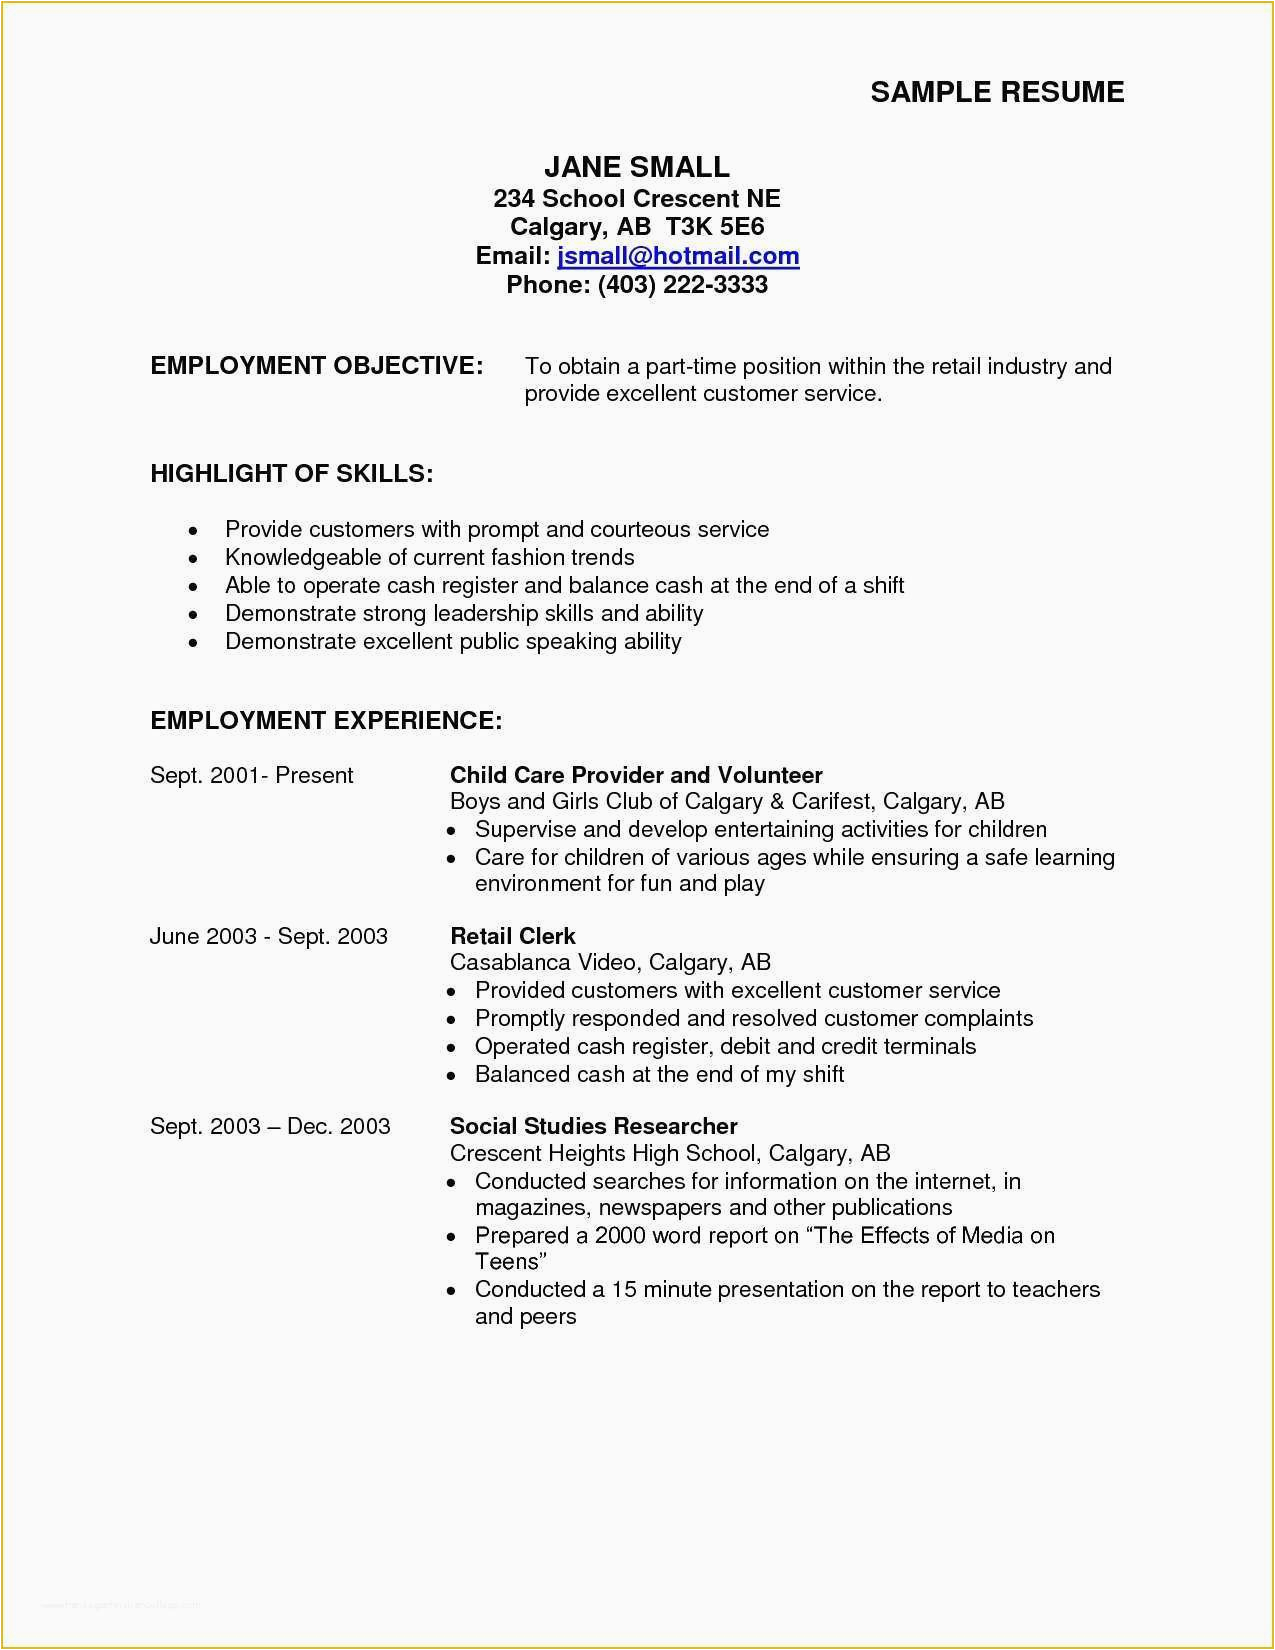 Resume Sample for First Time Job Seeker Free Resume Templates for First Time Job Seekers Resume